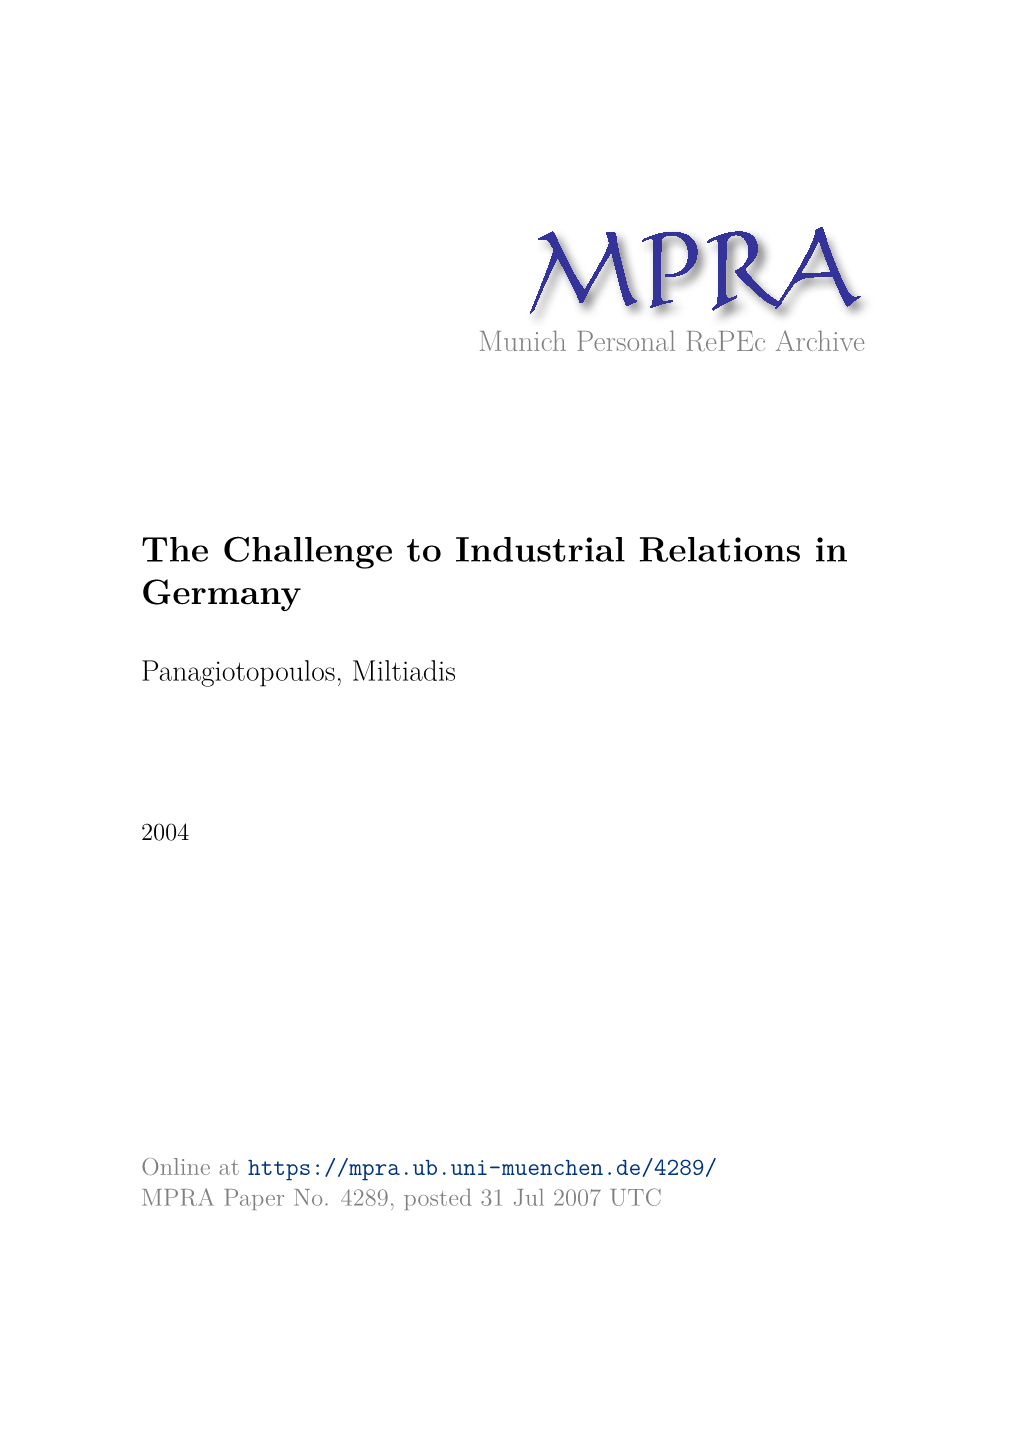 The Challenge to Industrial Relations in Germany